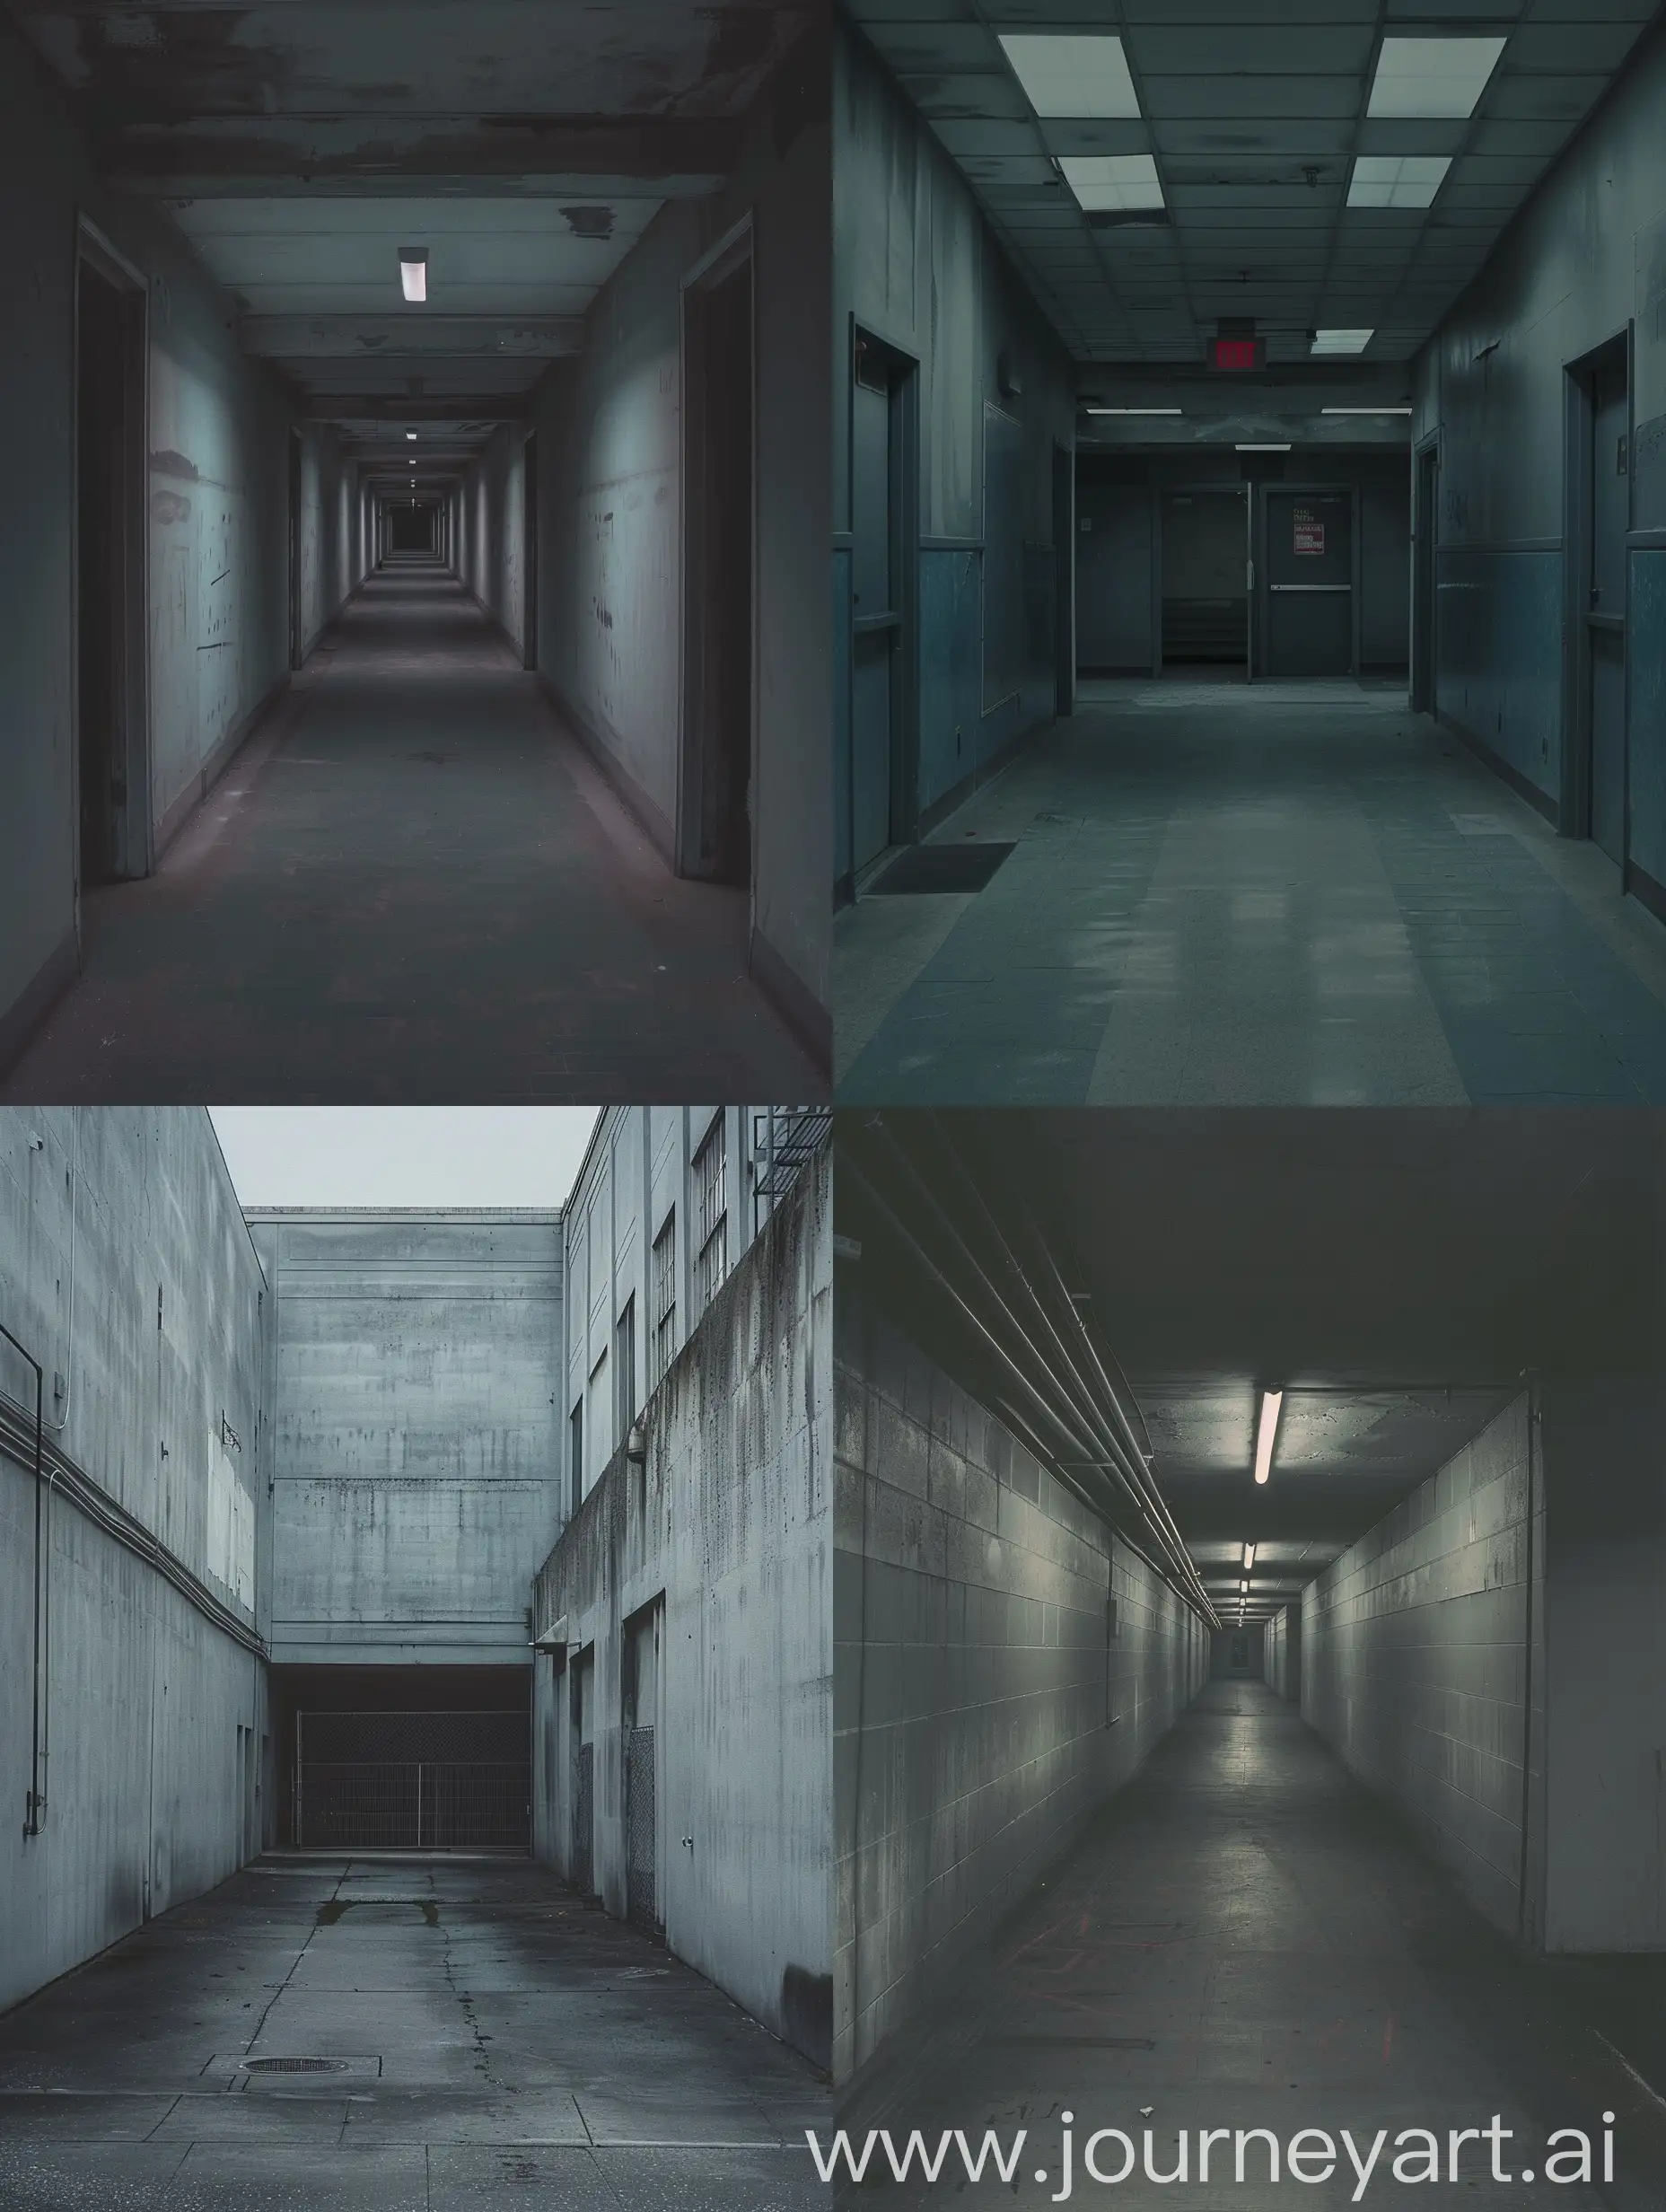 Eerie-Empty-Alley-in-Early-2000s-Found-Footage-Muted-Grey-Tones